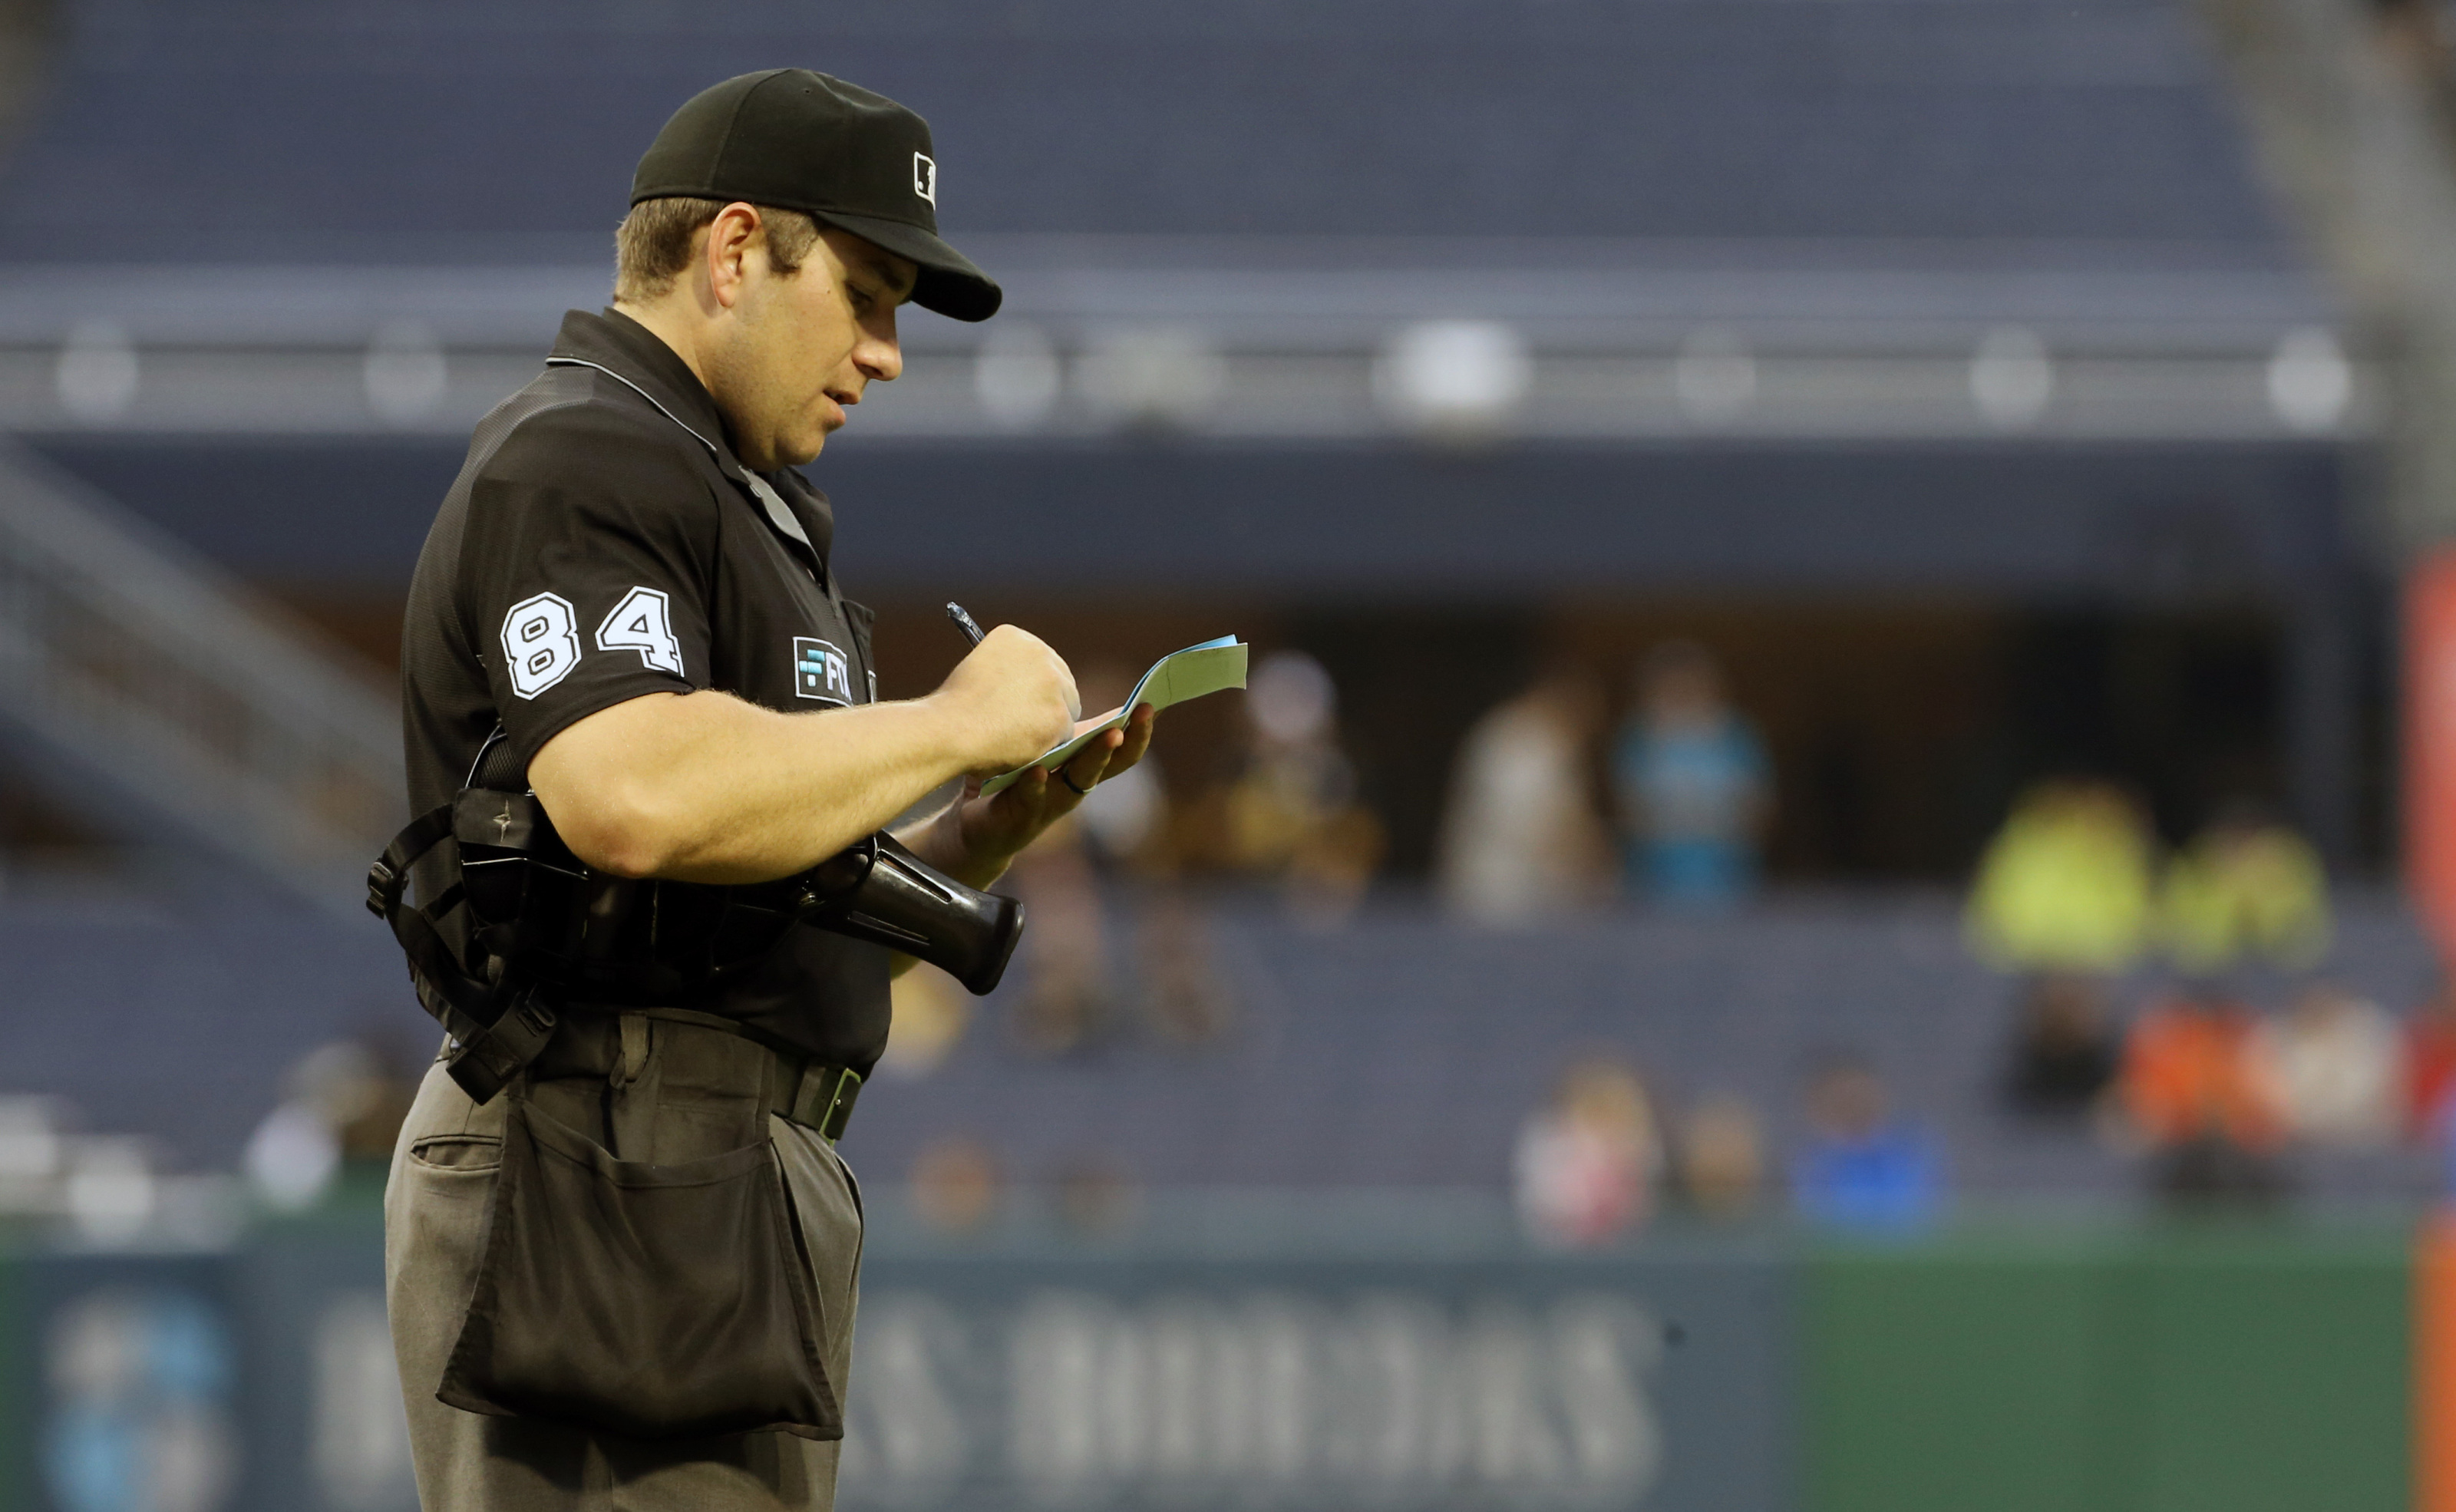 World Series umpire salaries How much do MLB umpires get paid for 2022  World Series games  Sporting News